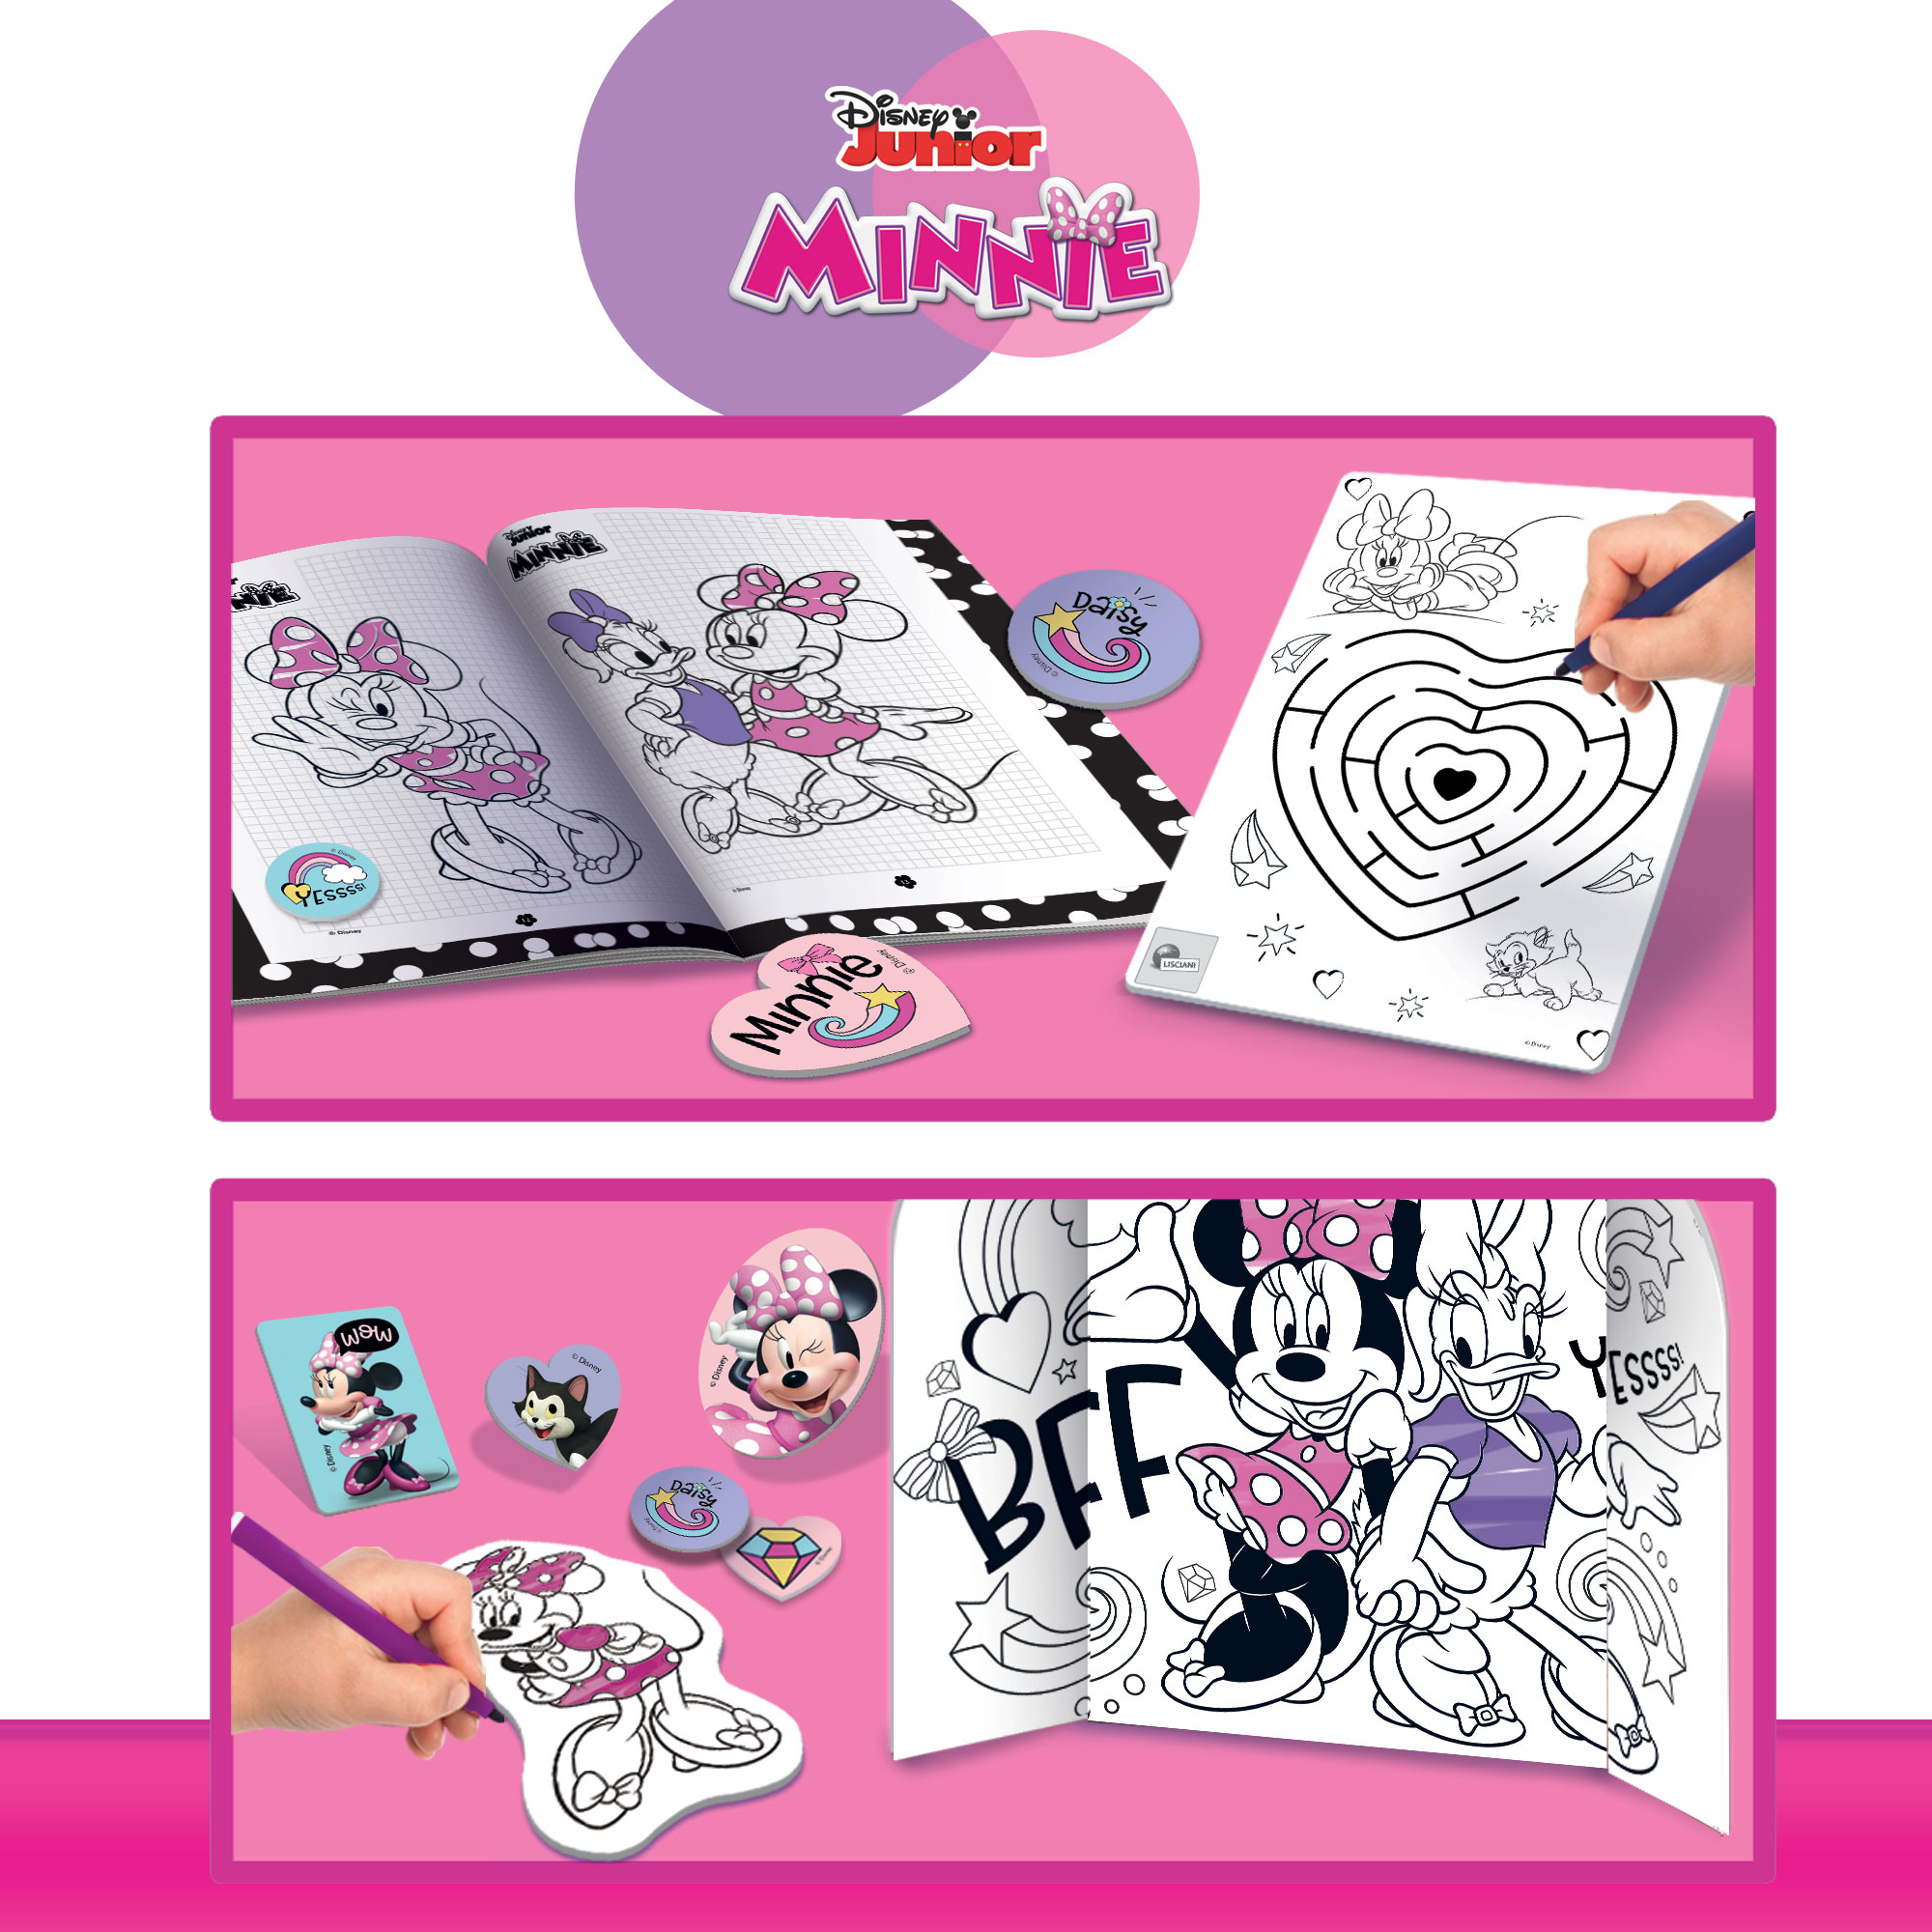 Photo 4 of the game MINNIE ZAINETTO COLOURING AND DRAWING SCHOOL